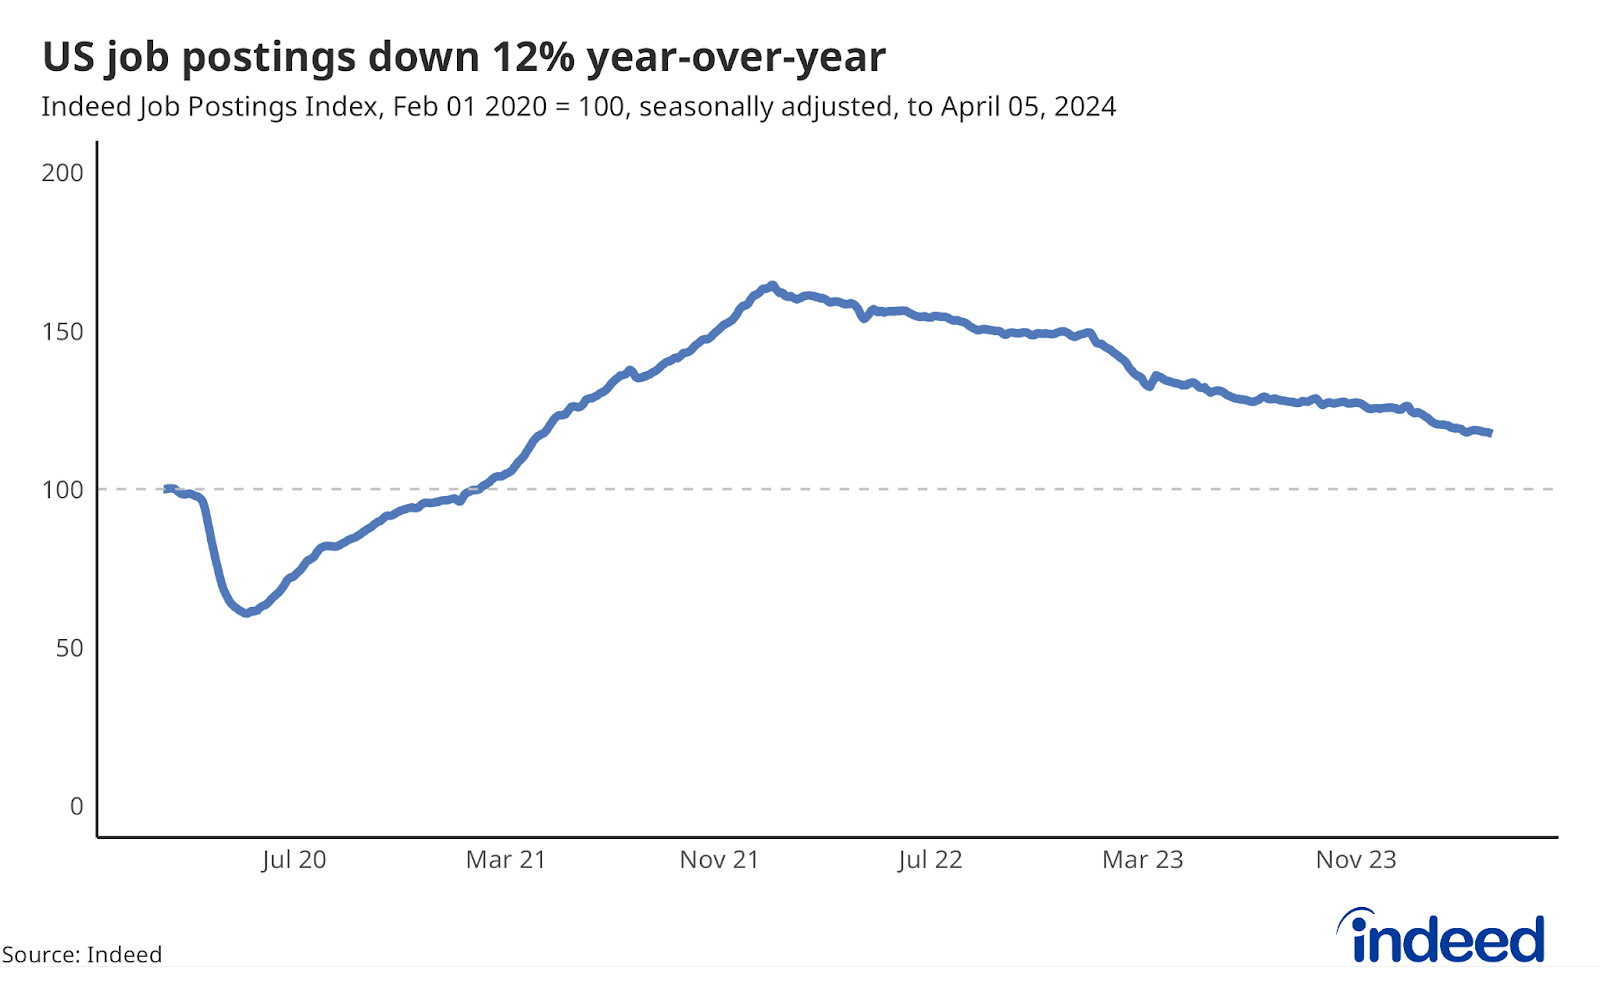 Line graph showing the change in Indeed job postings since their pre-pandemic baseline, through April 5, 2024. US job postings have fallen 12% over the past year.